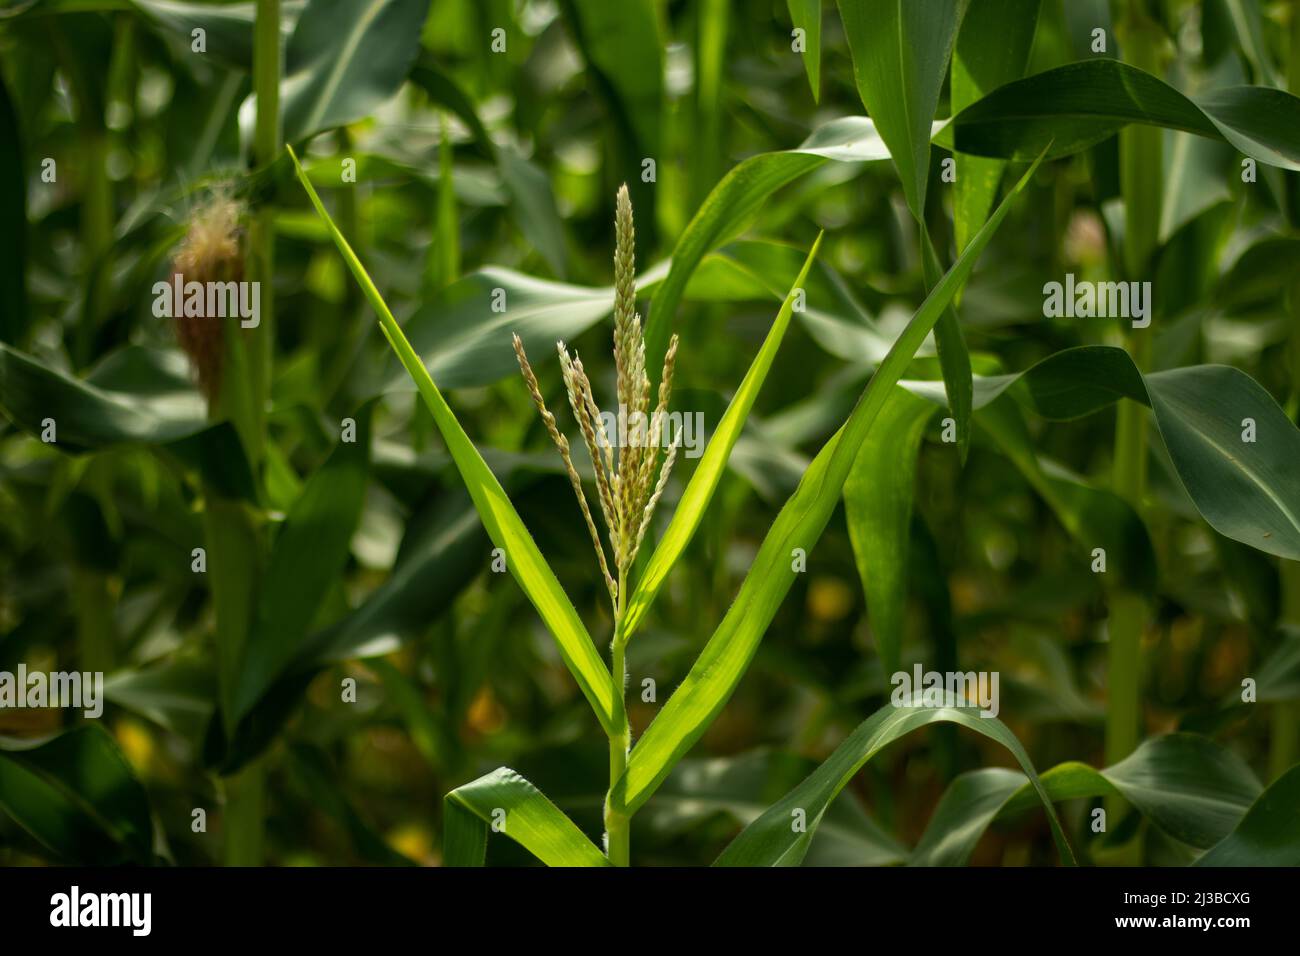 Maize or Zea mays or Corn is a monoecious plant with imperfect flowers that is, separate male and female flowers on the same plant. Stock Photo